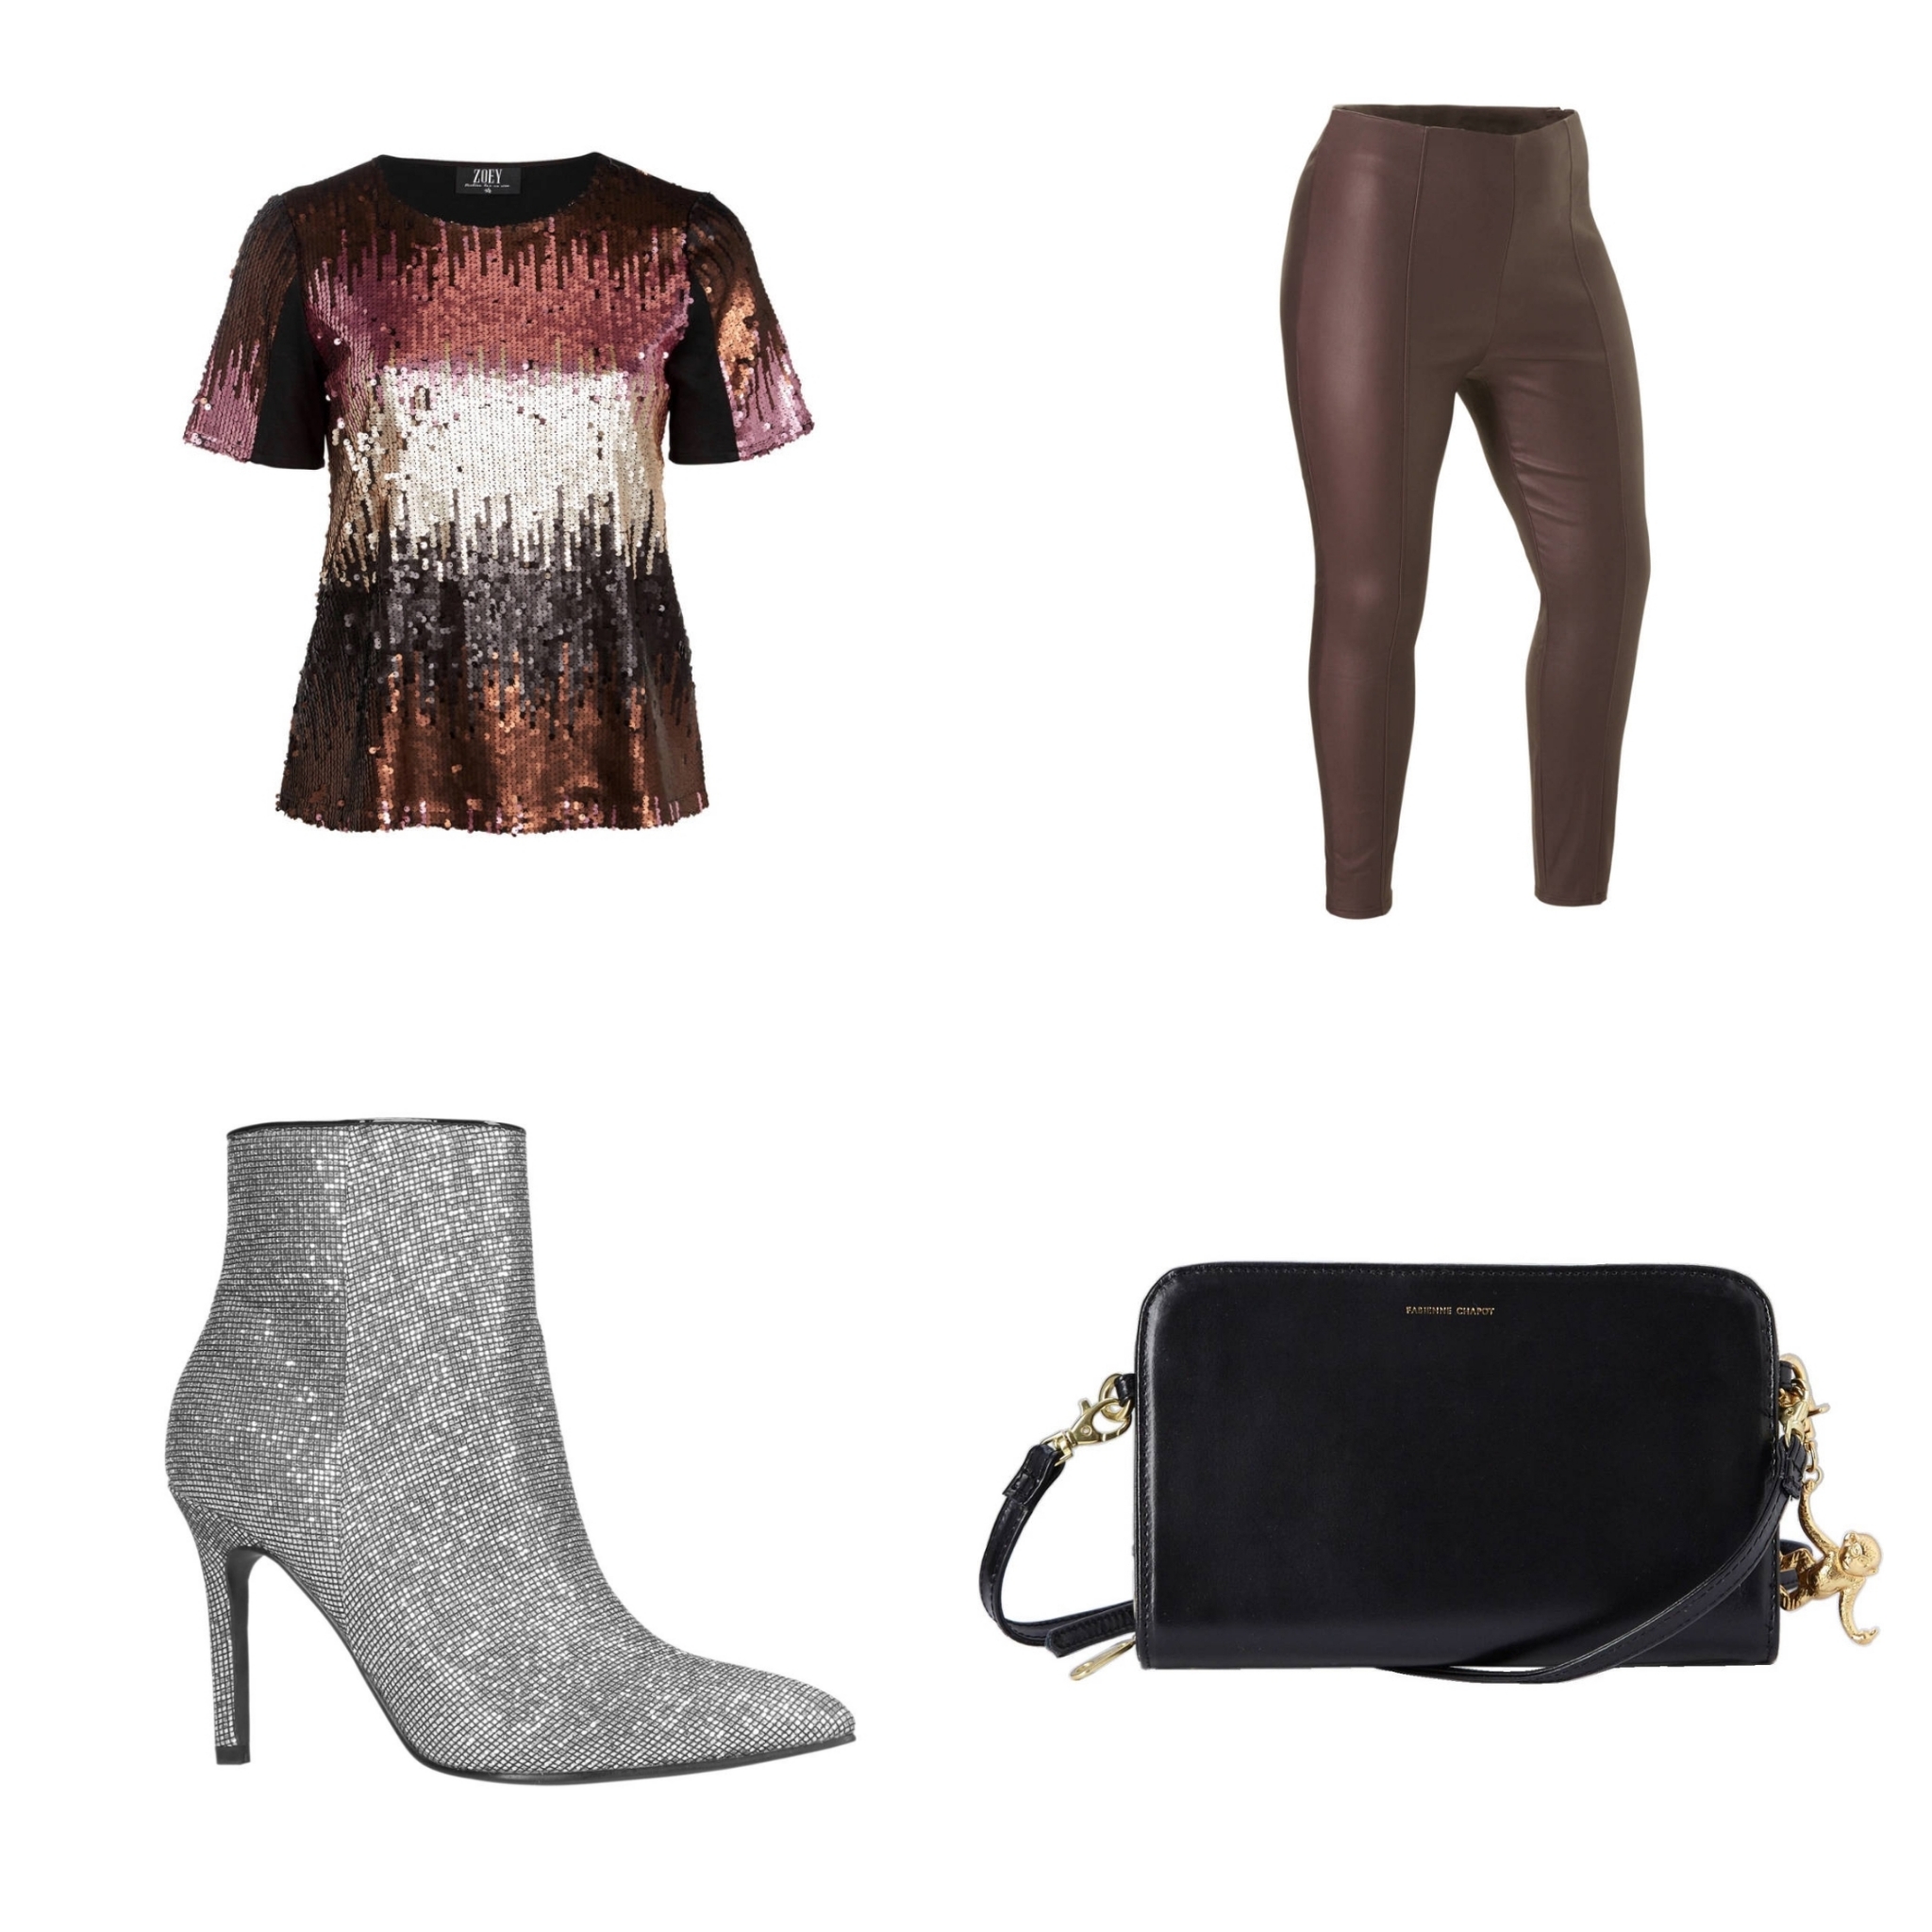 Plus Size Fashion Friday: Add some glitter to your life